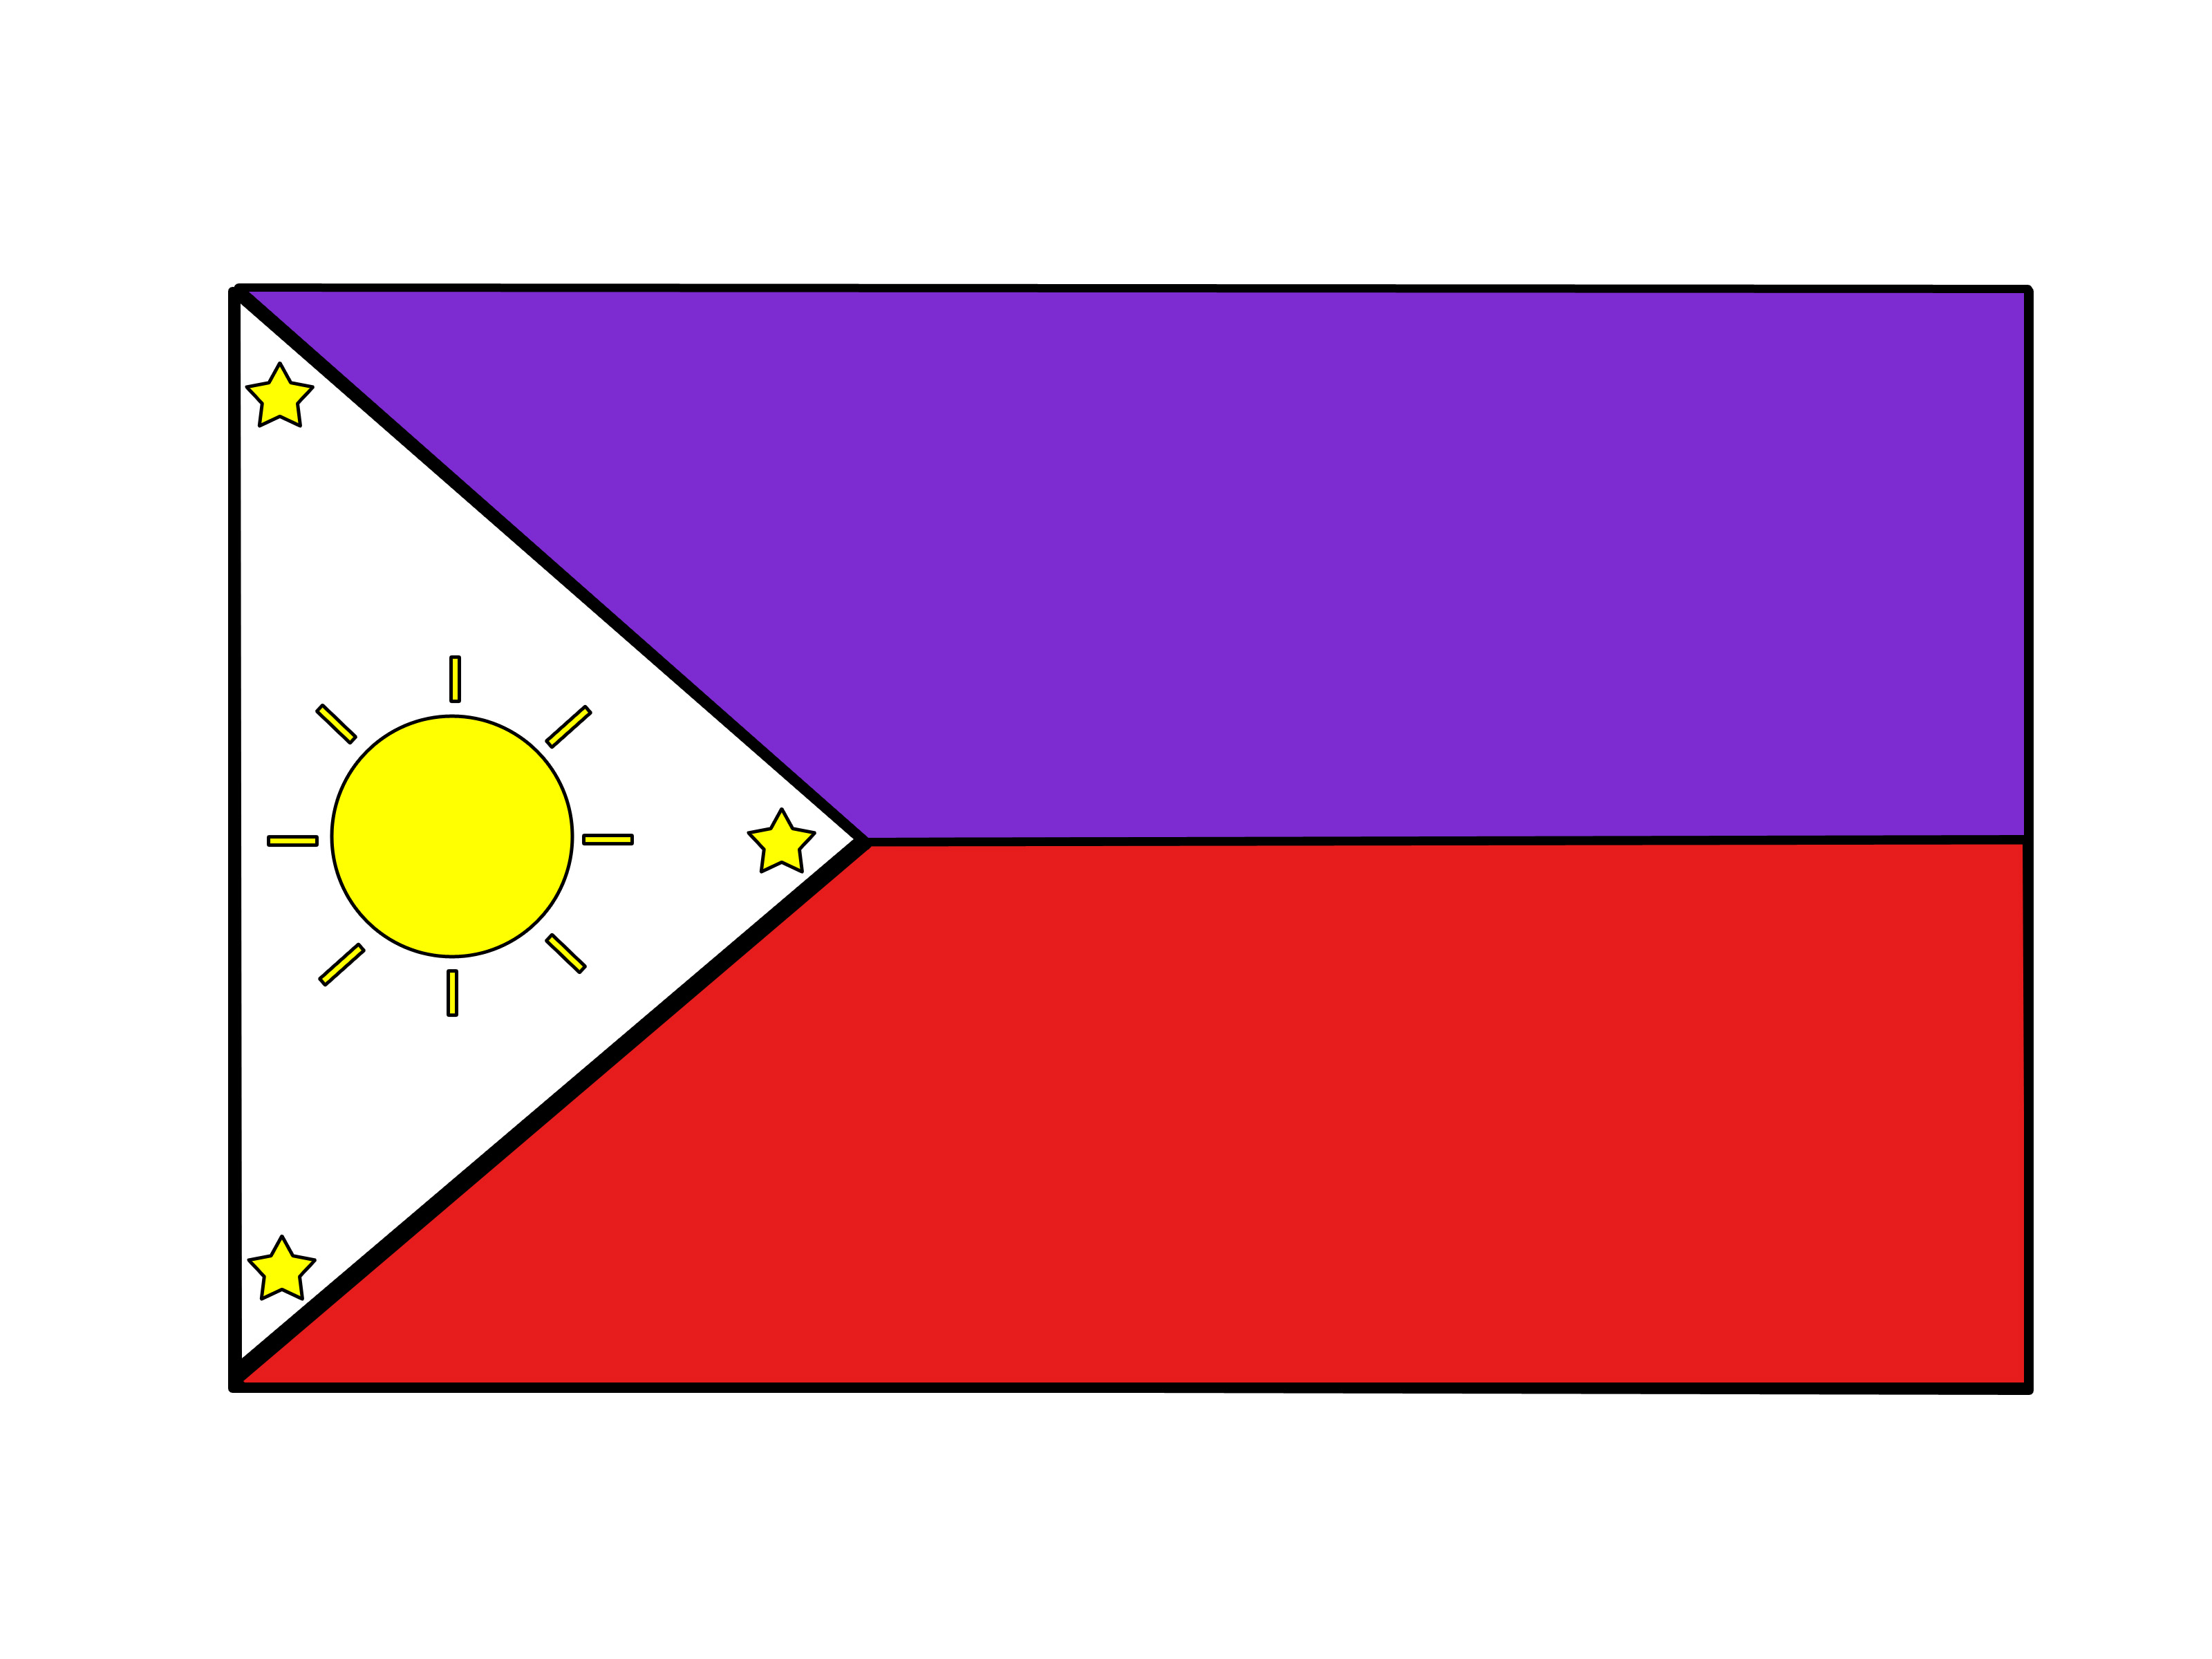 Flag Of The Philippines Drawing at GetDrawings | Free download